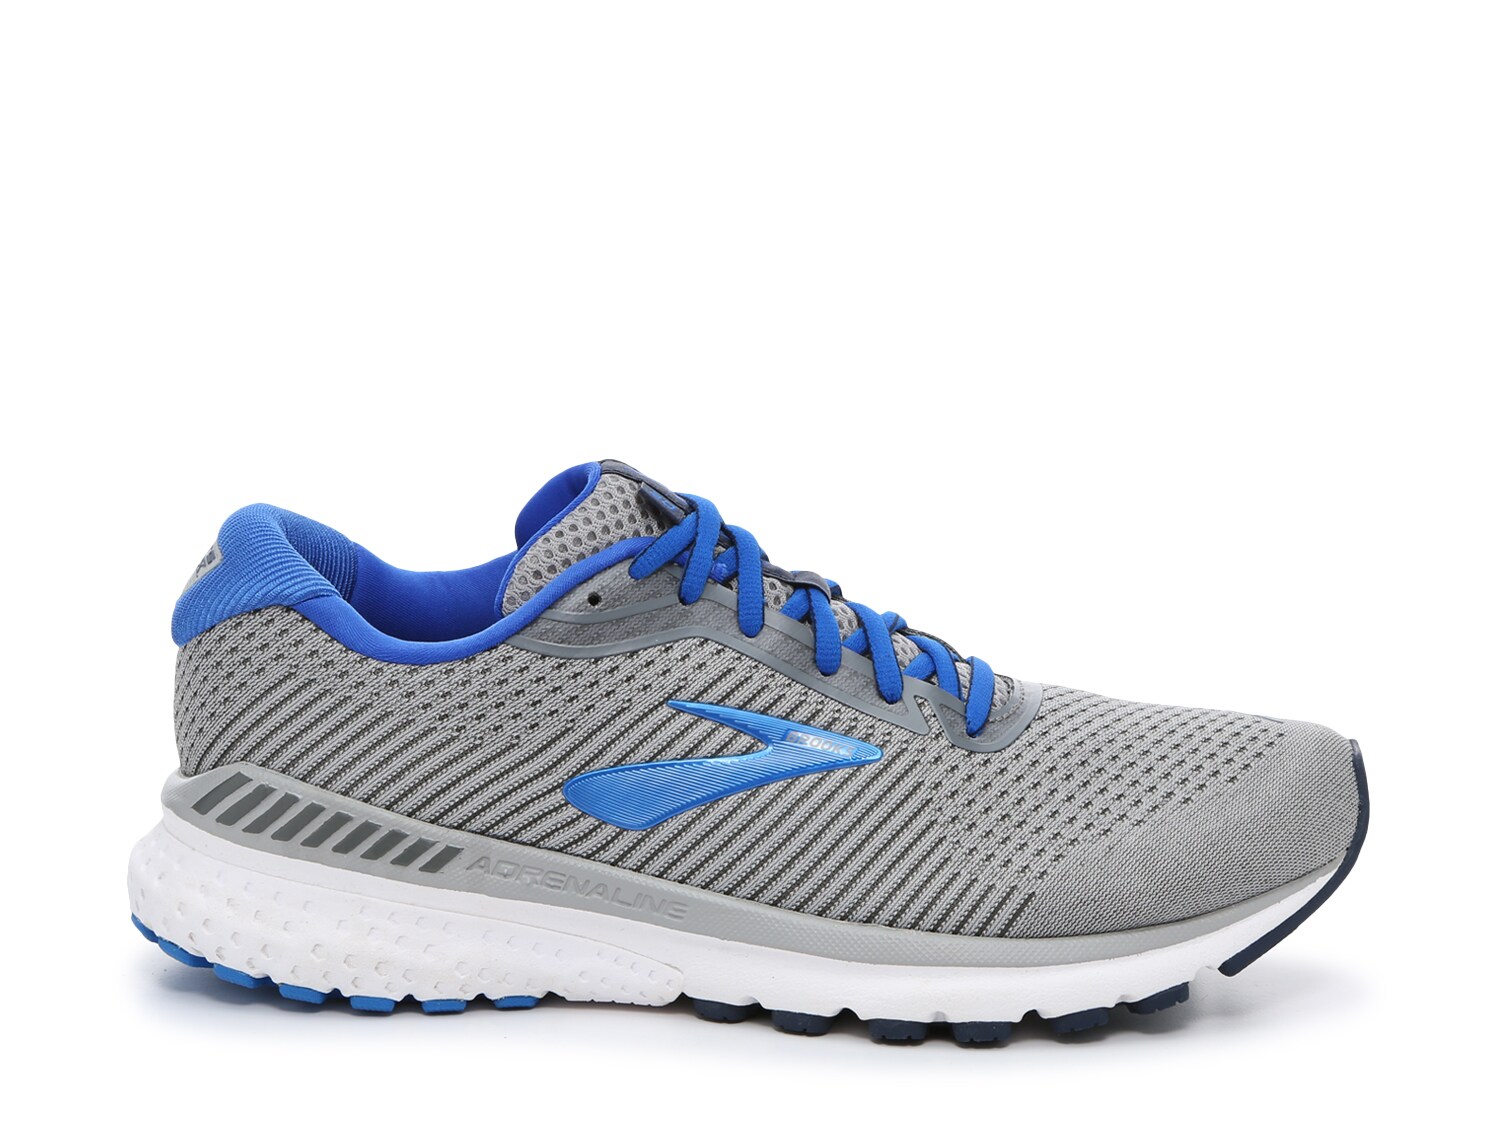 dsw brooks running shoes